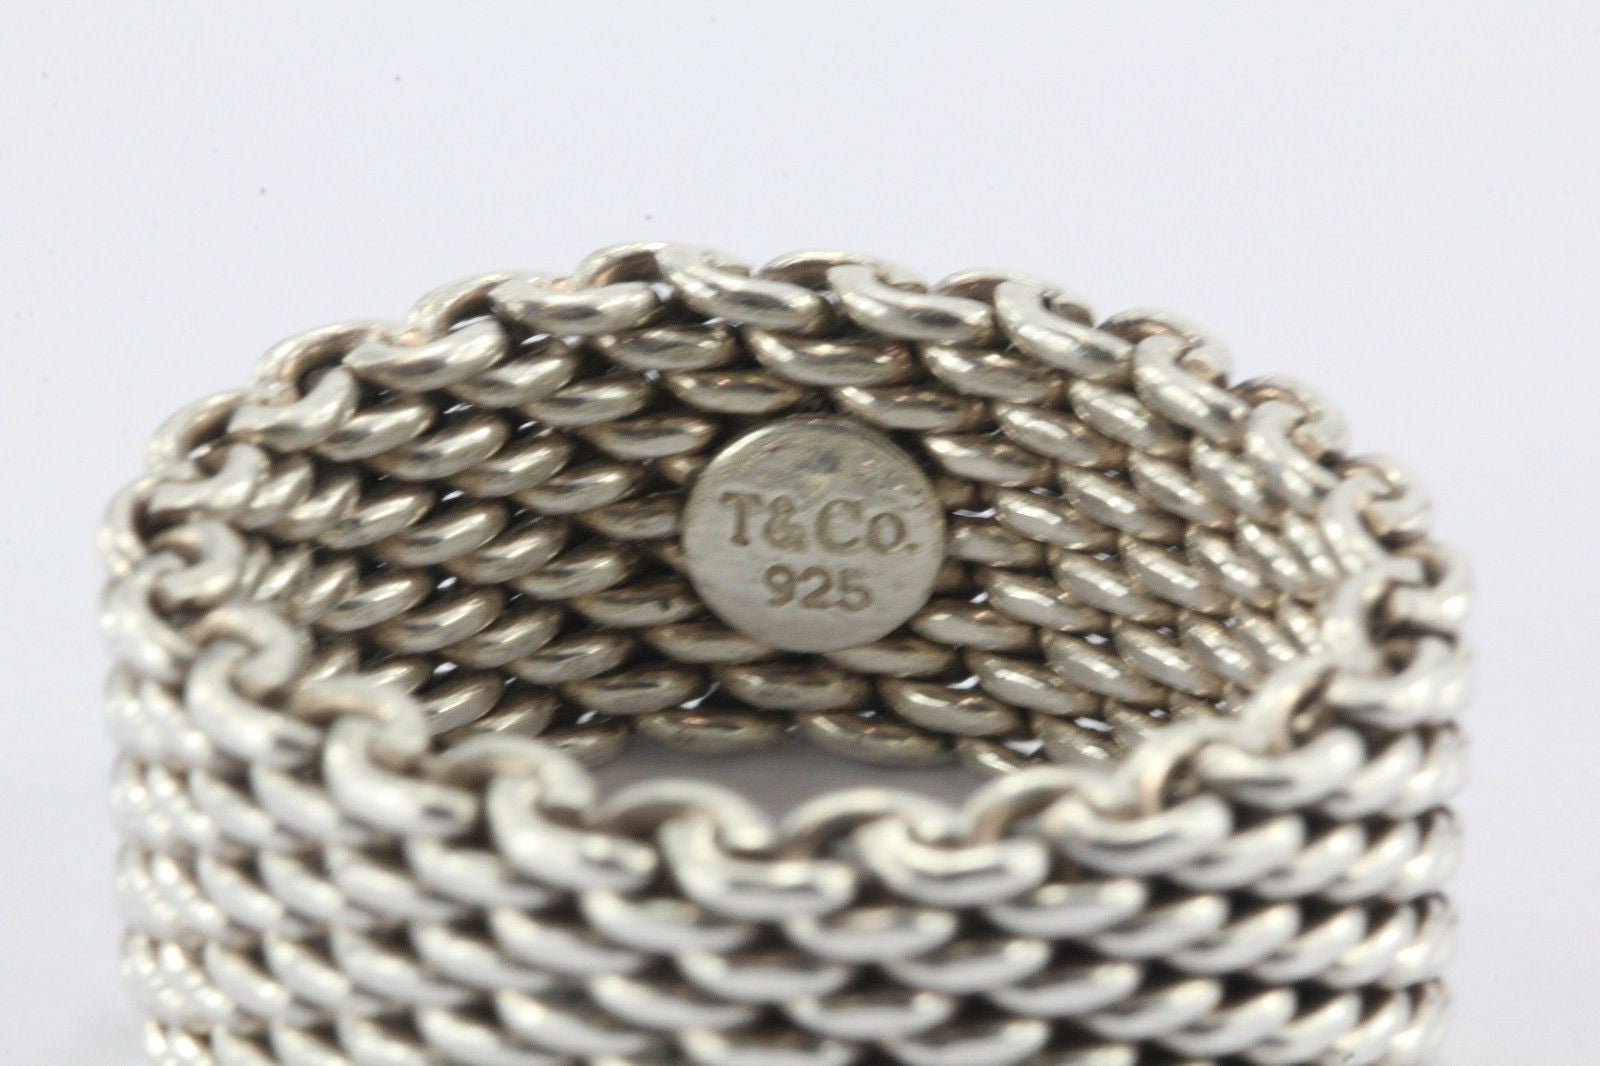 Vintage Tiffany & Co Sterling Silver Mesh Ring Band Size 9.5